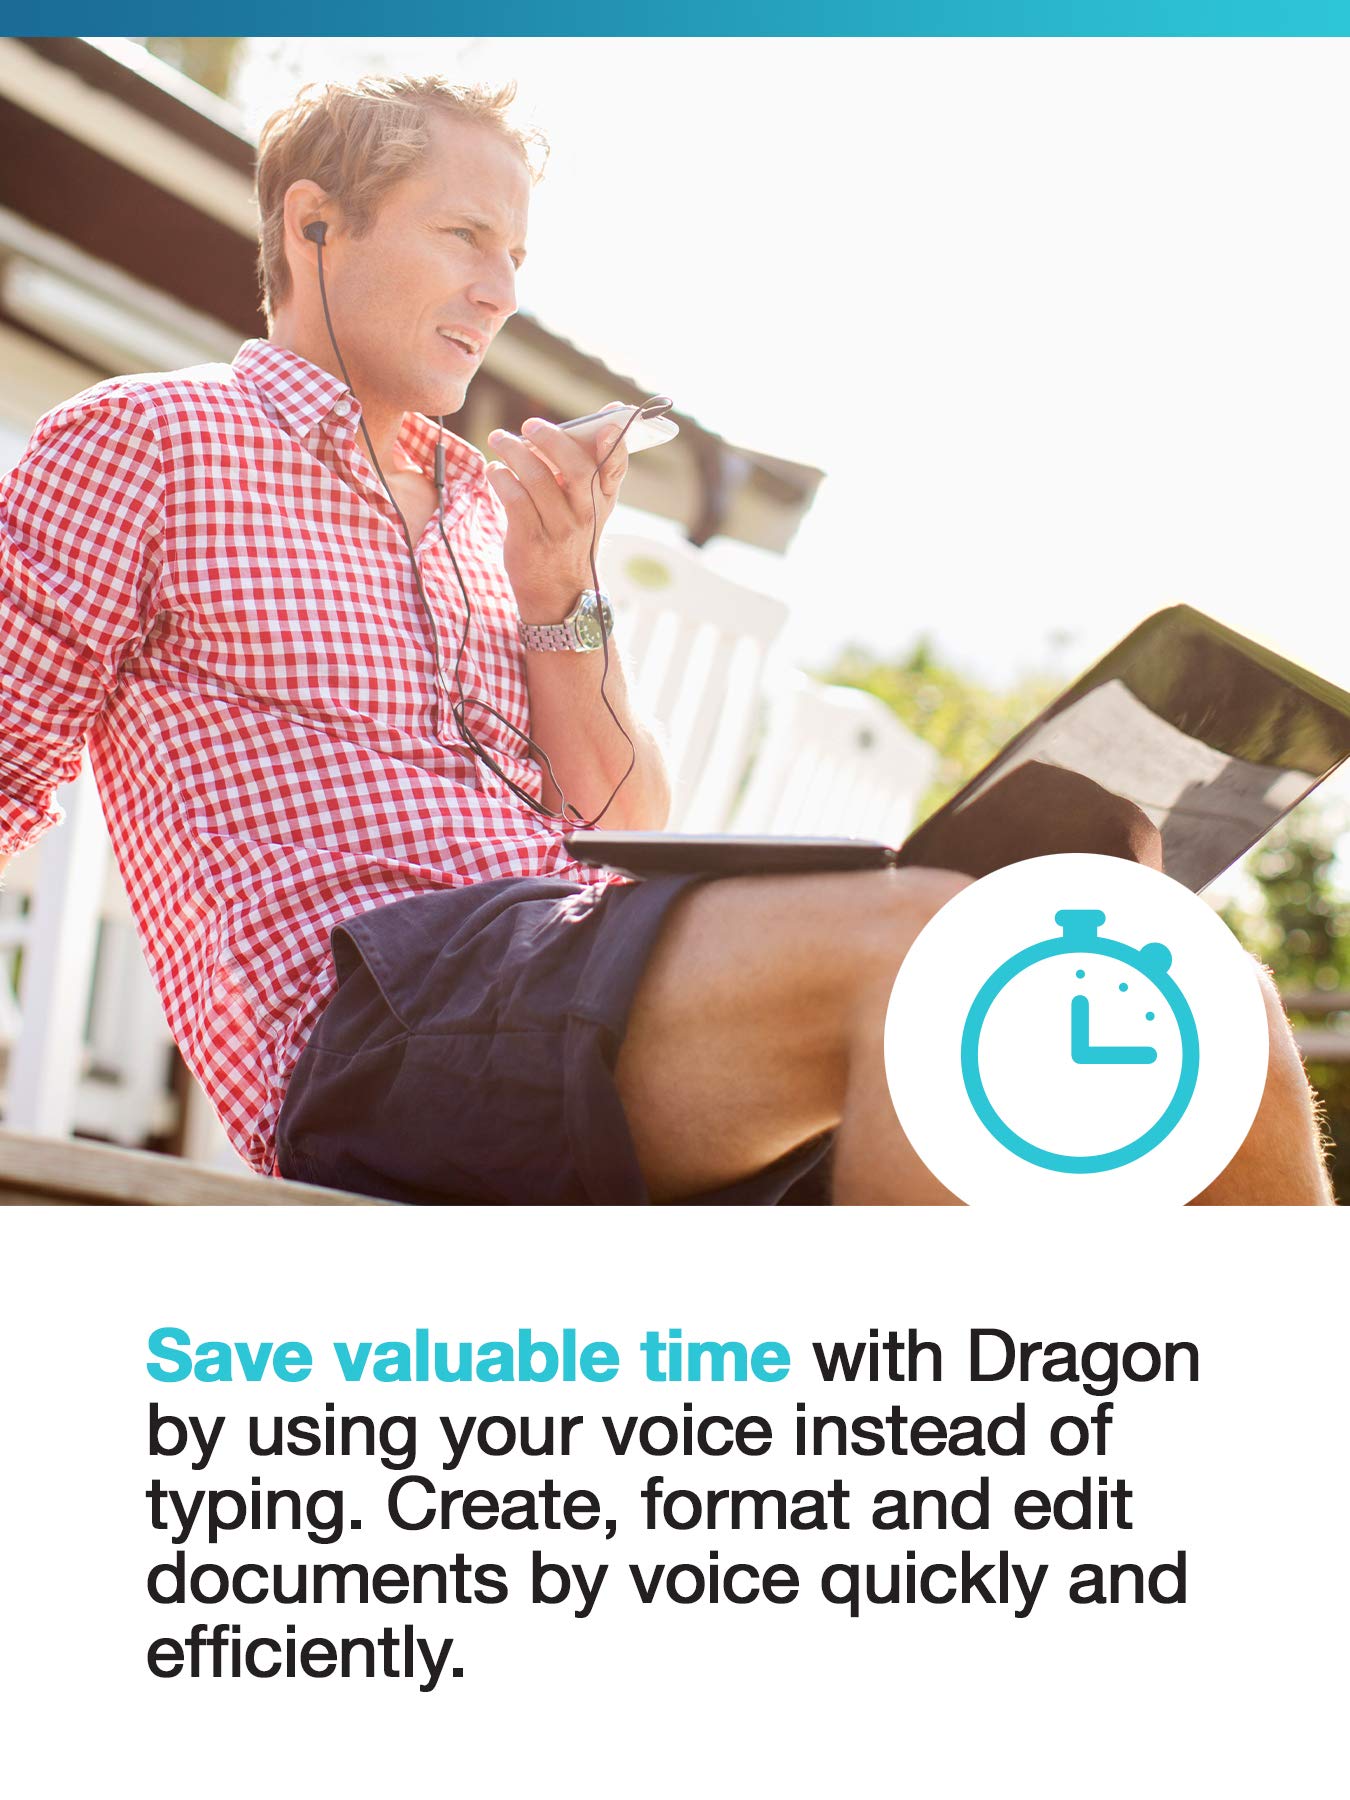 Dragon Home 15.0, Dictate Documents and Control your PC with Voice Recognition Software – [PC Download]